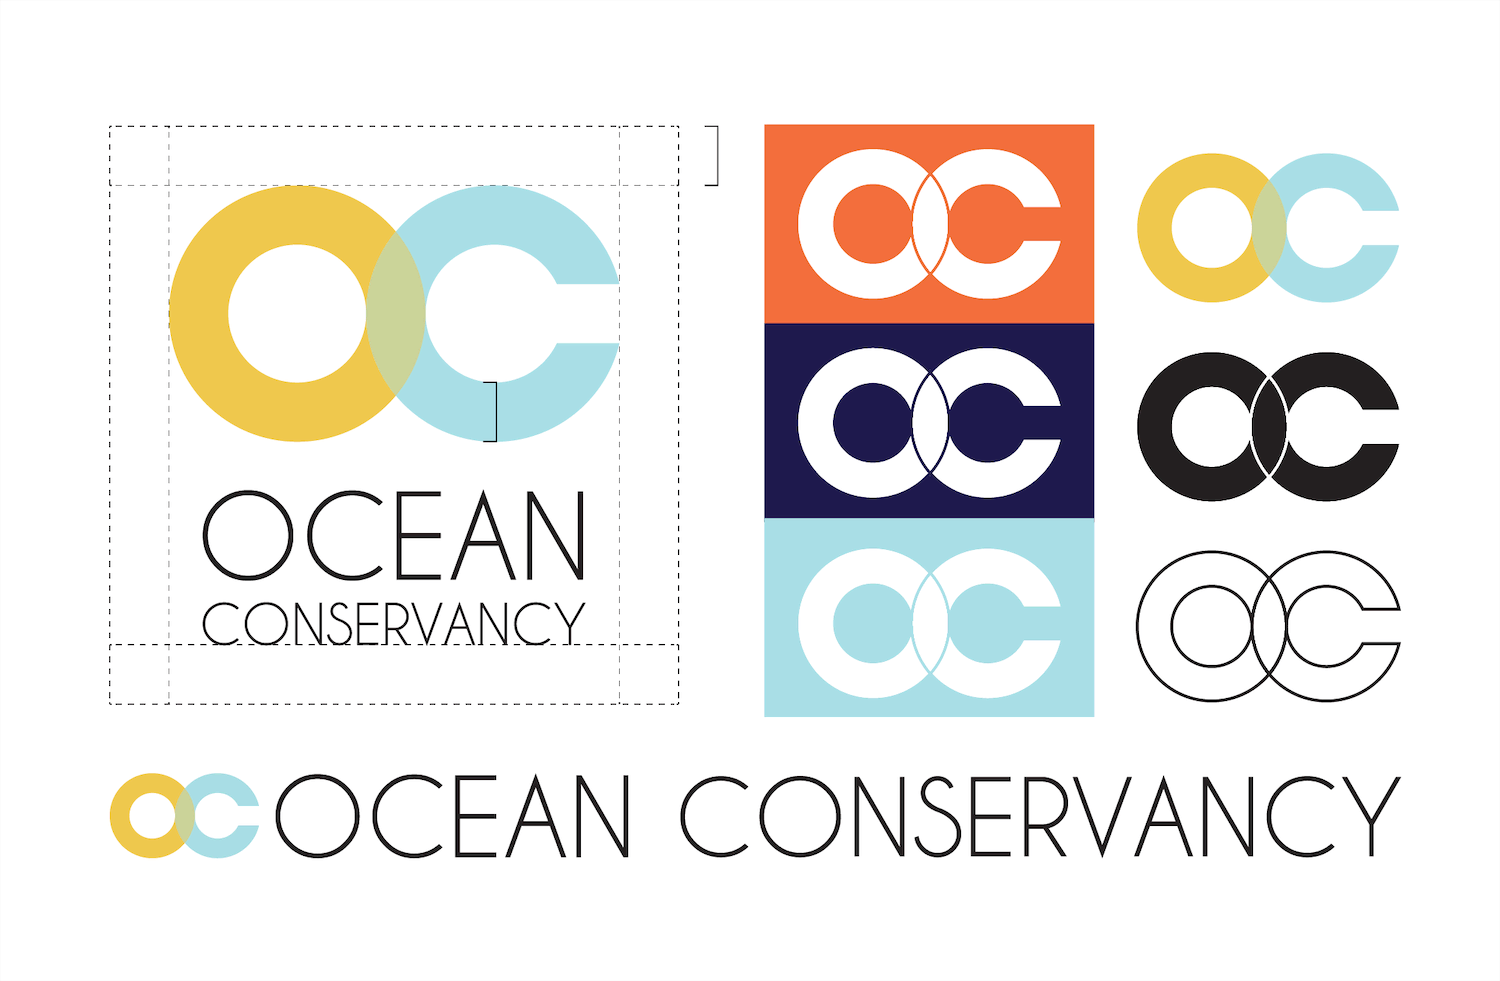 The New Ocean Conservancy logo Mocked up with spatial guidelines, and alternate logos shown over differing colors.